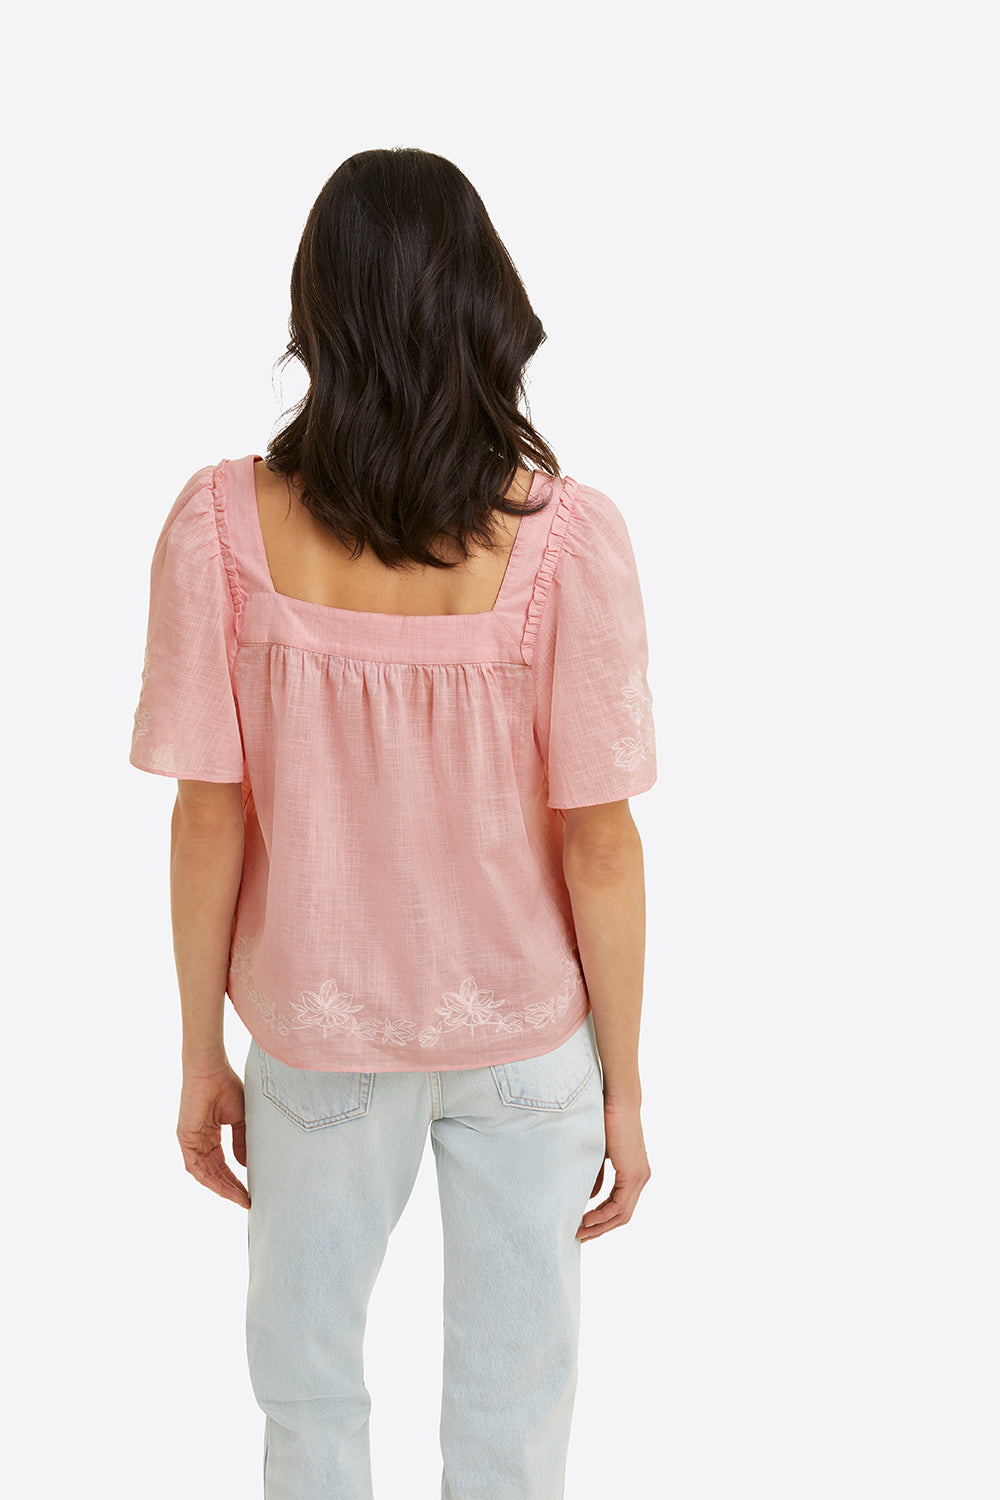 Maren Top in Pink Embroidered Floral